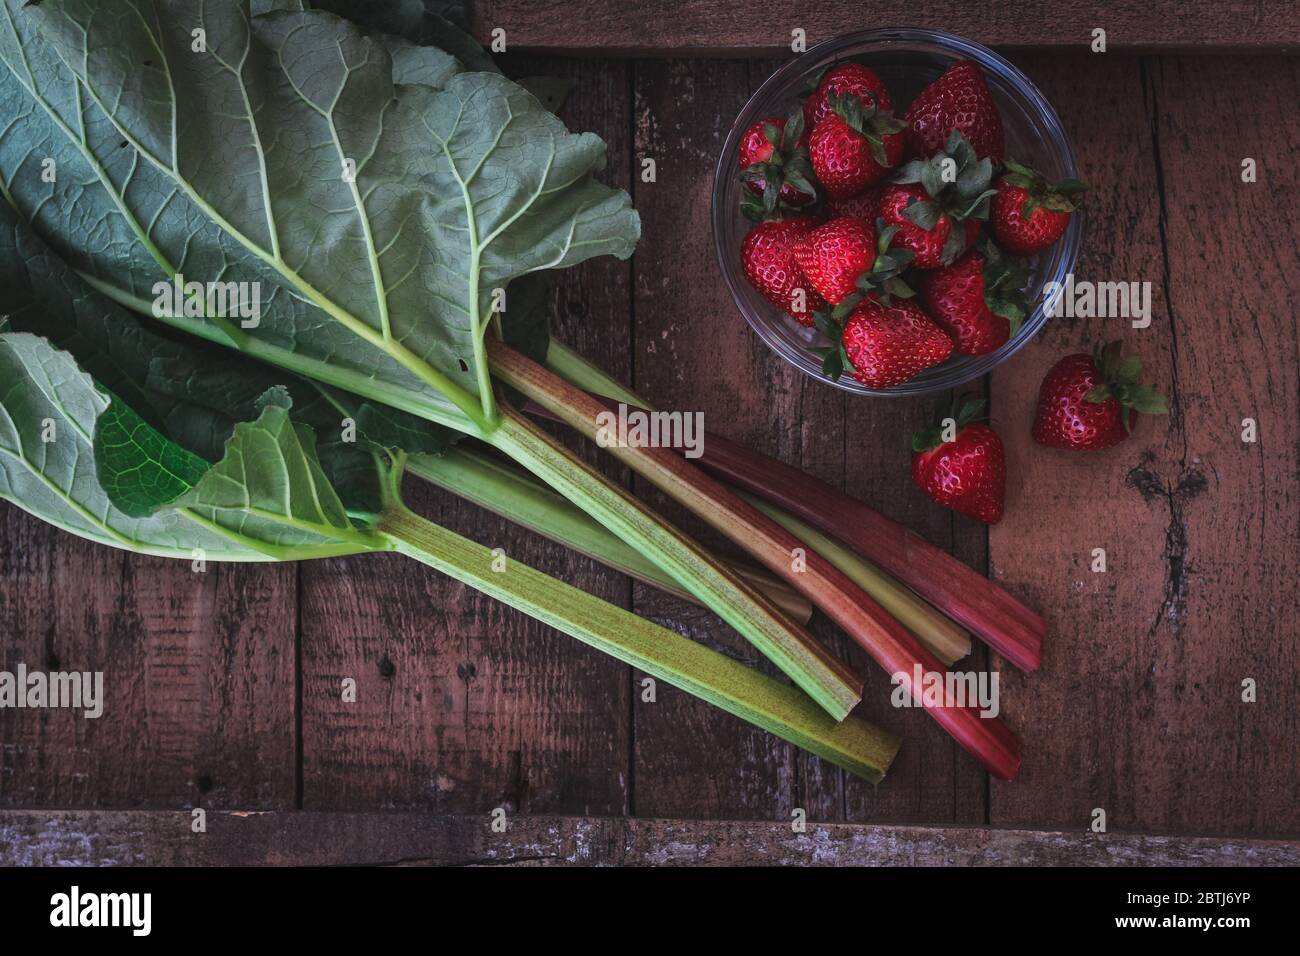 Rhubarb stems and strawberries on a dark garden table Stock Photo